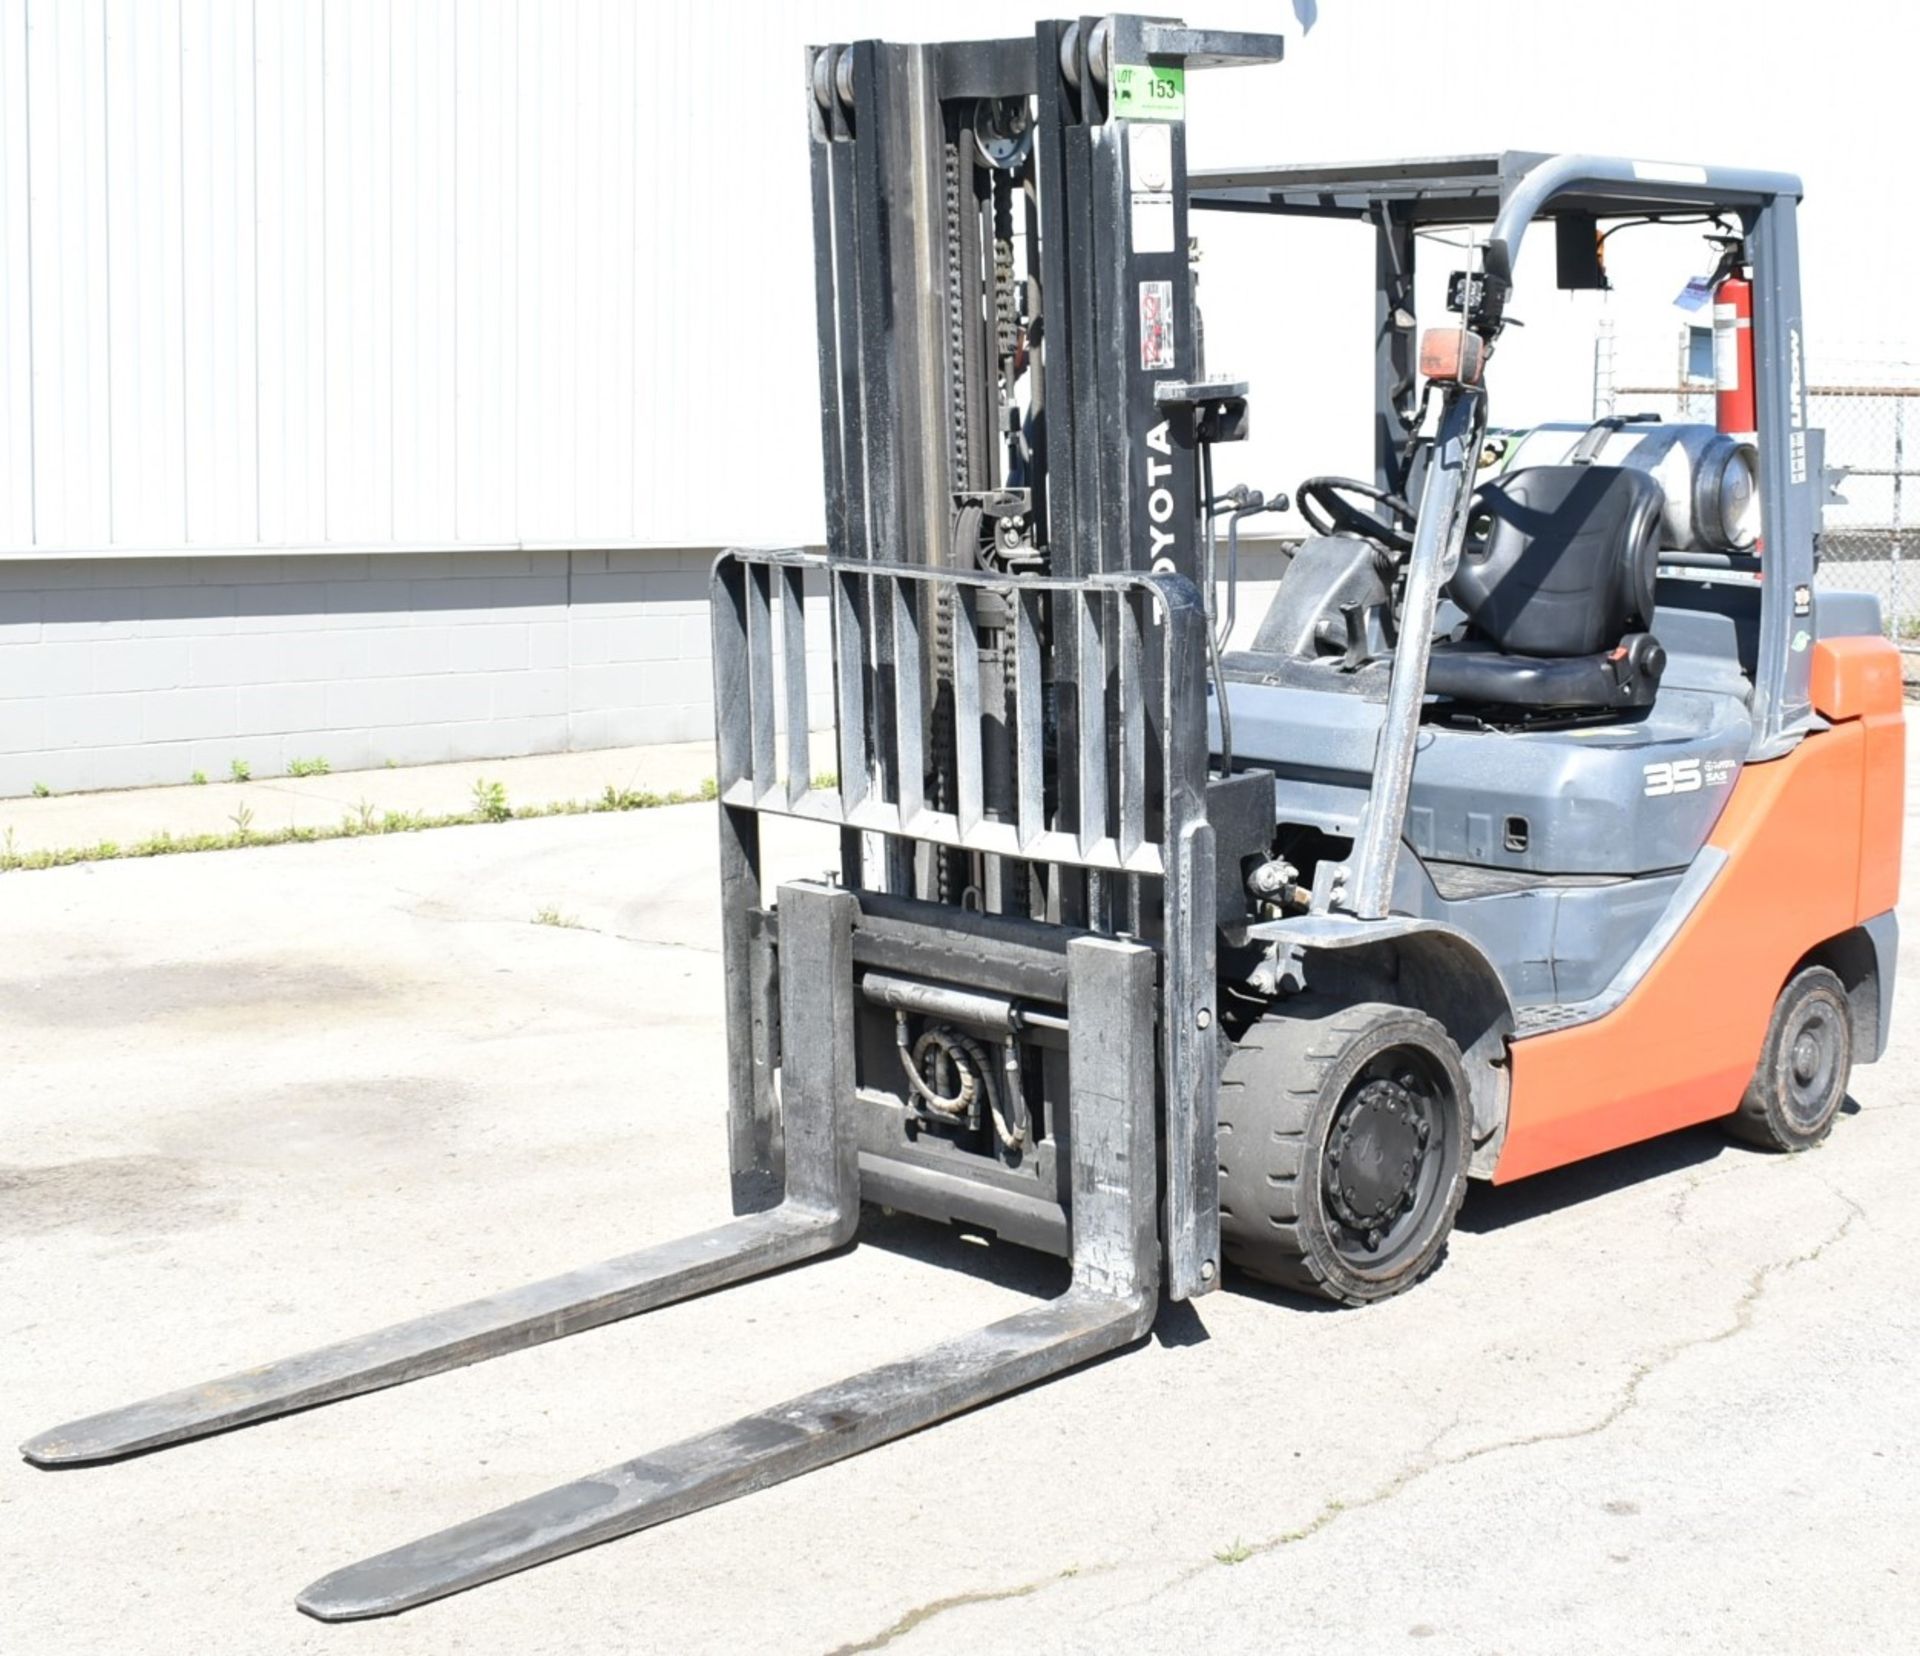 TOYOTA (2018) GC35U LPG FORKLIFT WITH 7250 LBS MAX CAPACITY, 187" 3-STAGE HIGH VISIBILITY MAST,